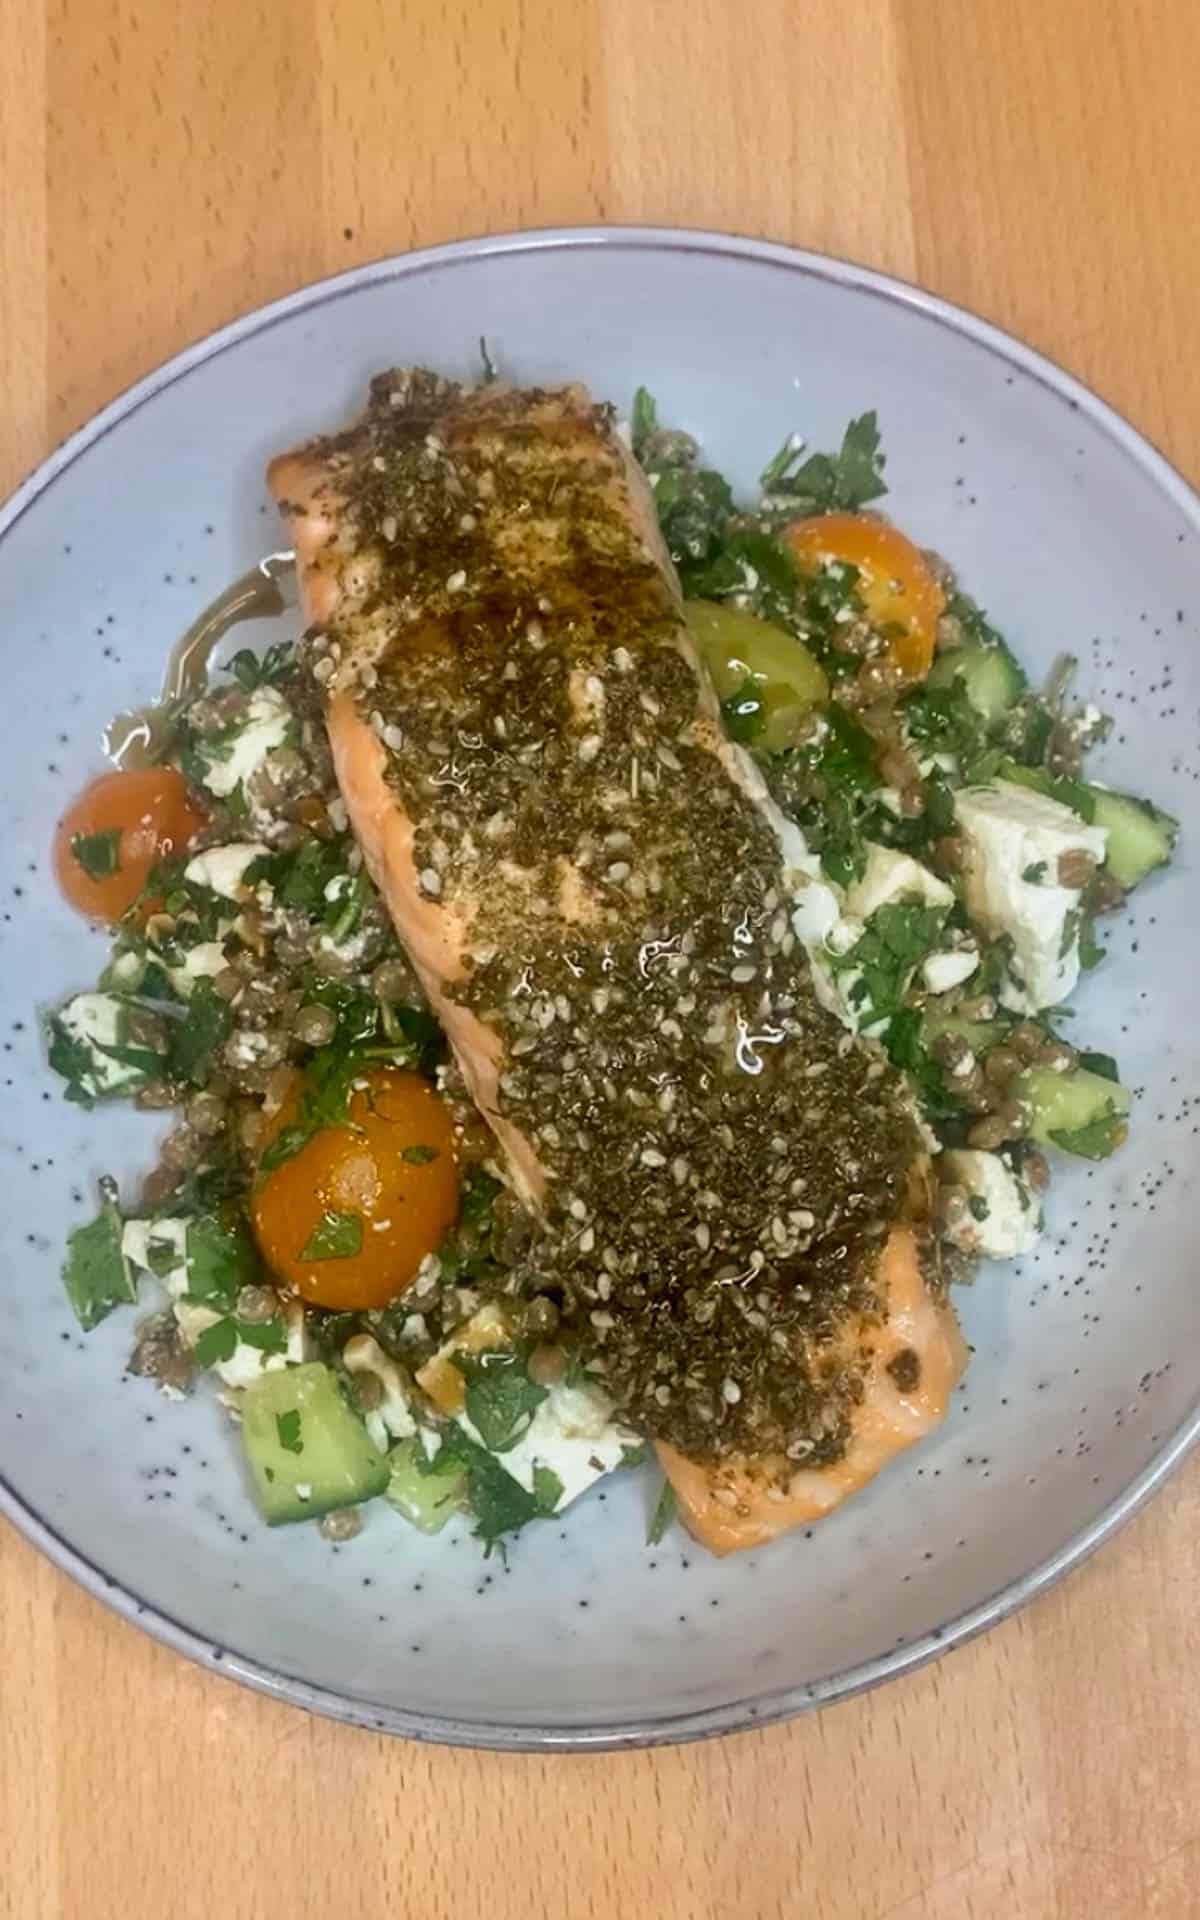 Blue bowl of salmon and salad